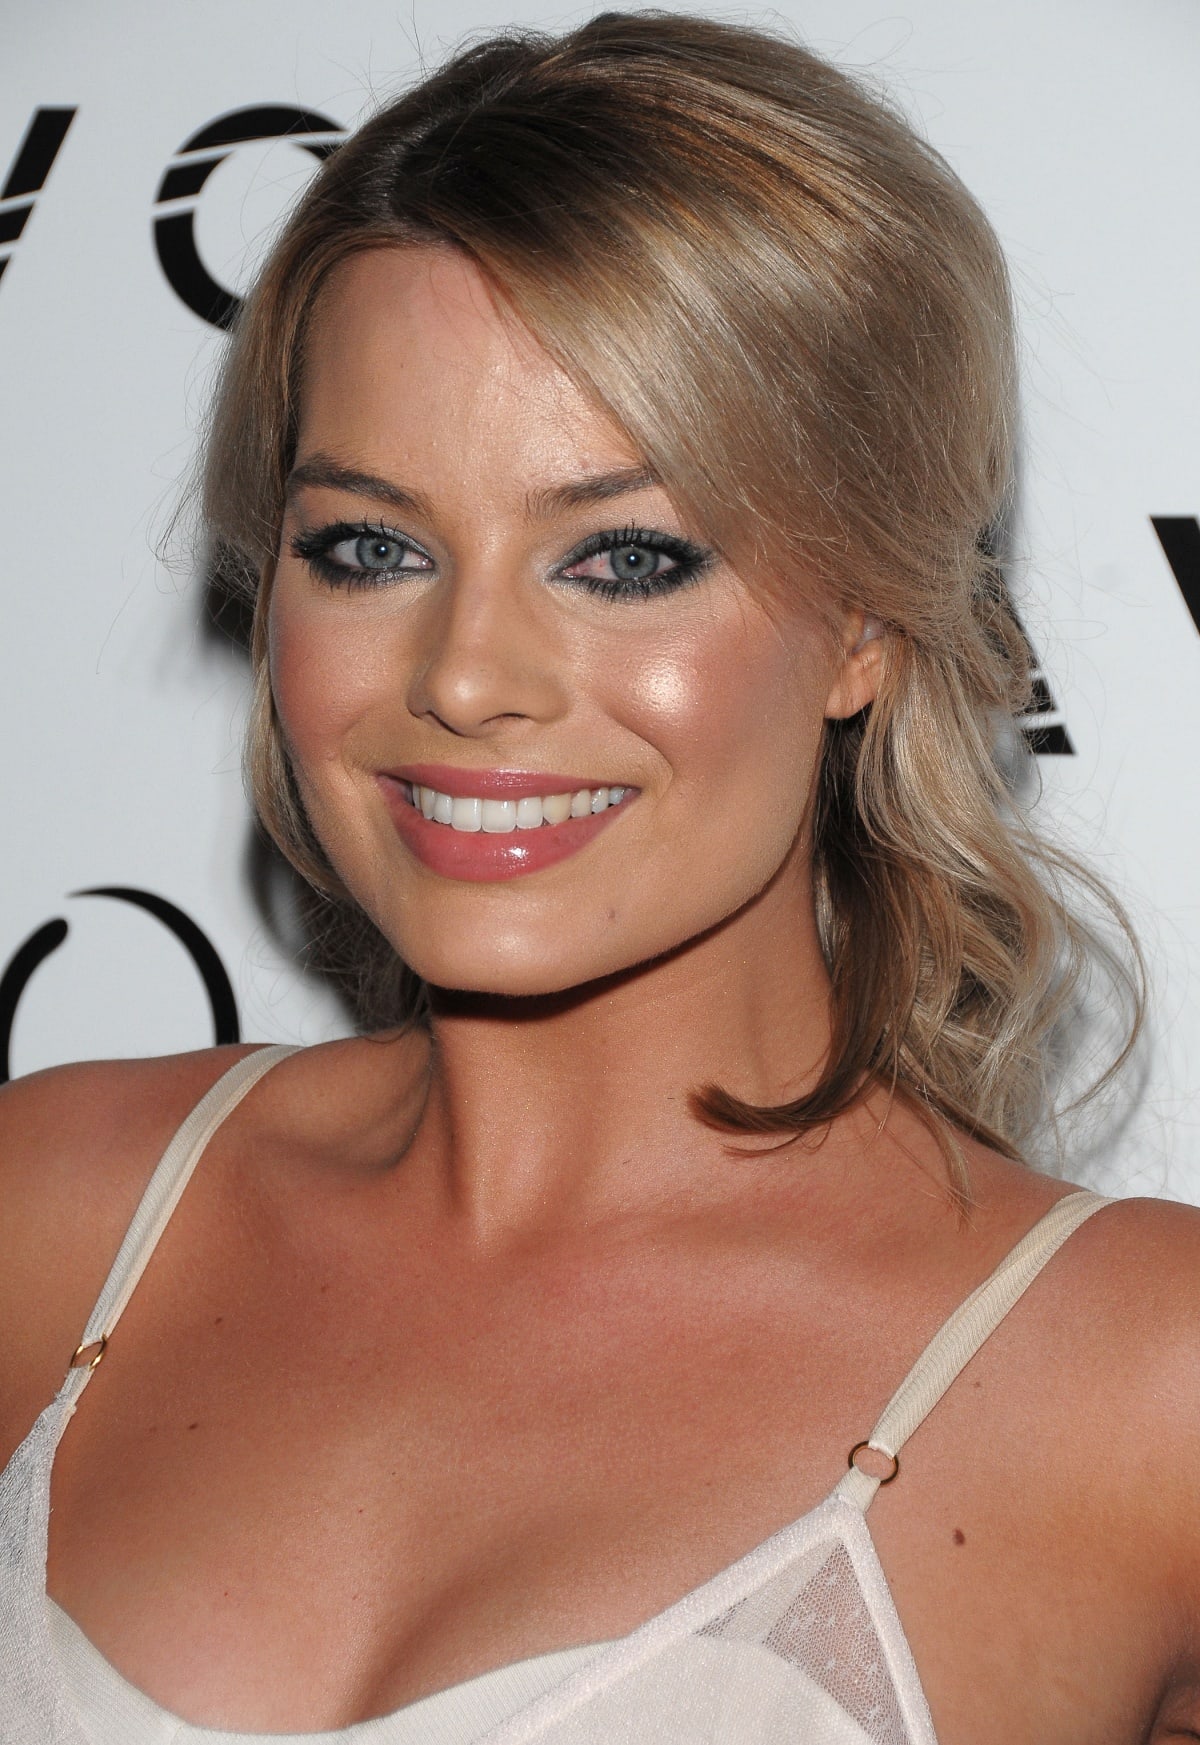 Multi-hyphenate star Margot Robbie also added producer to her job title